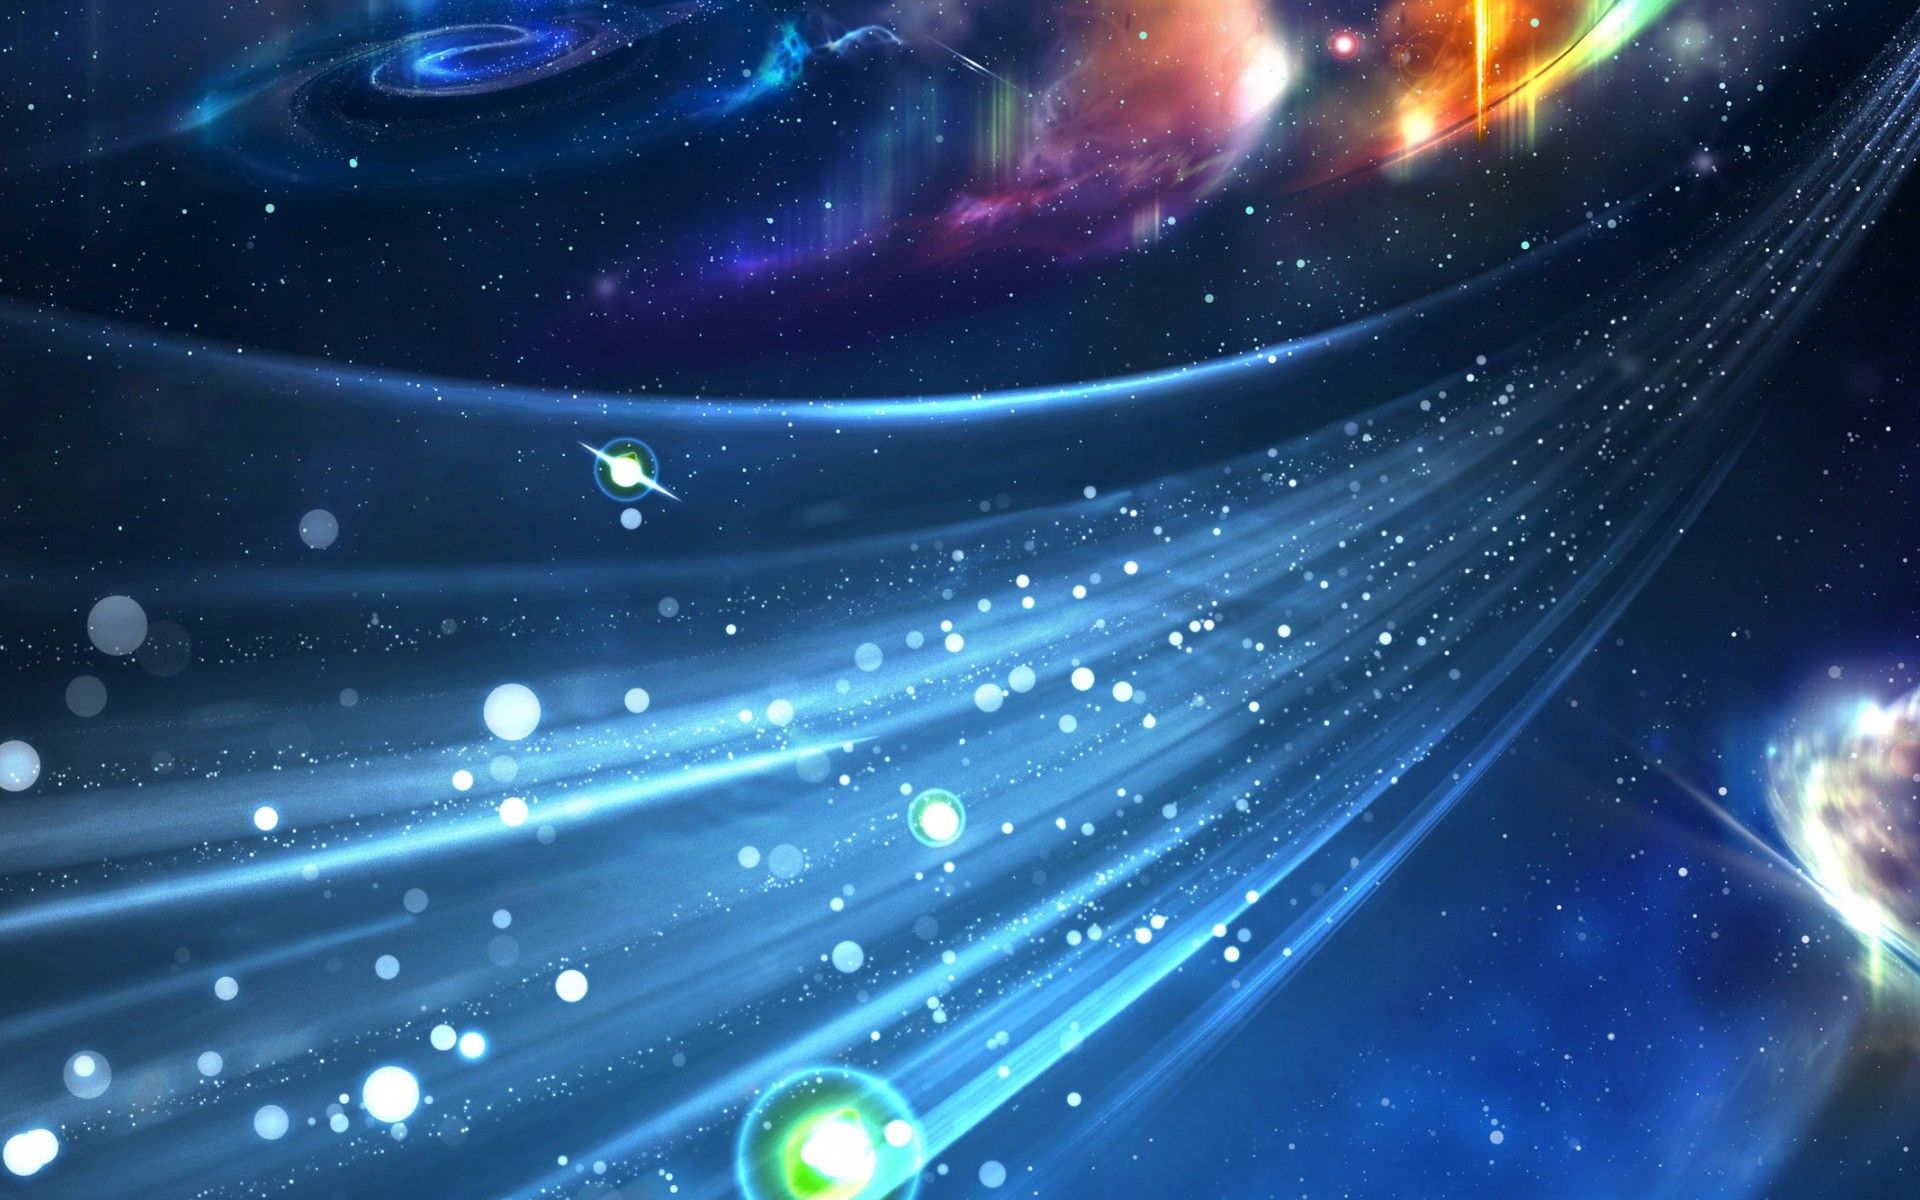 Space travel, universe, lights wallpaper. Space travel, universe, lights